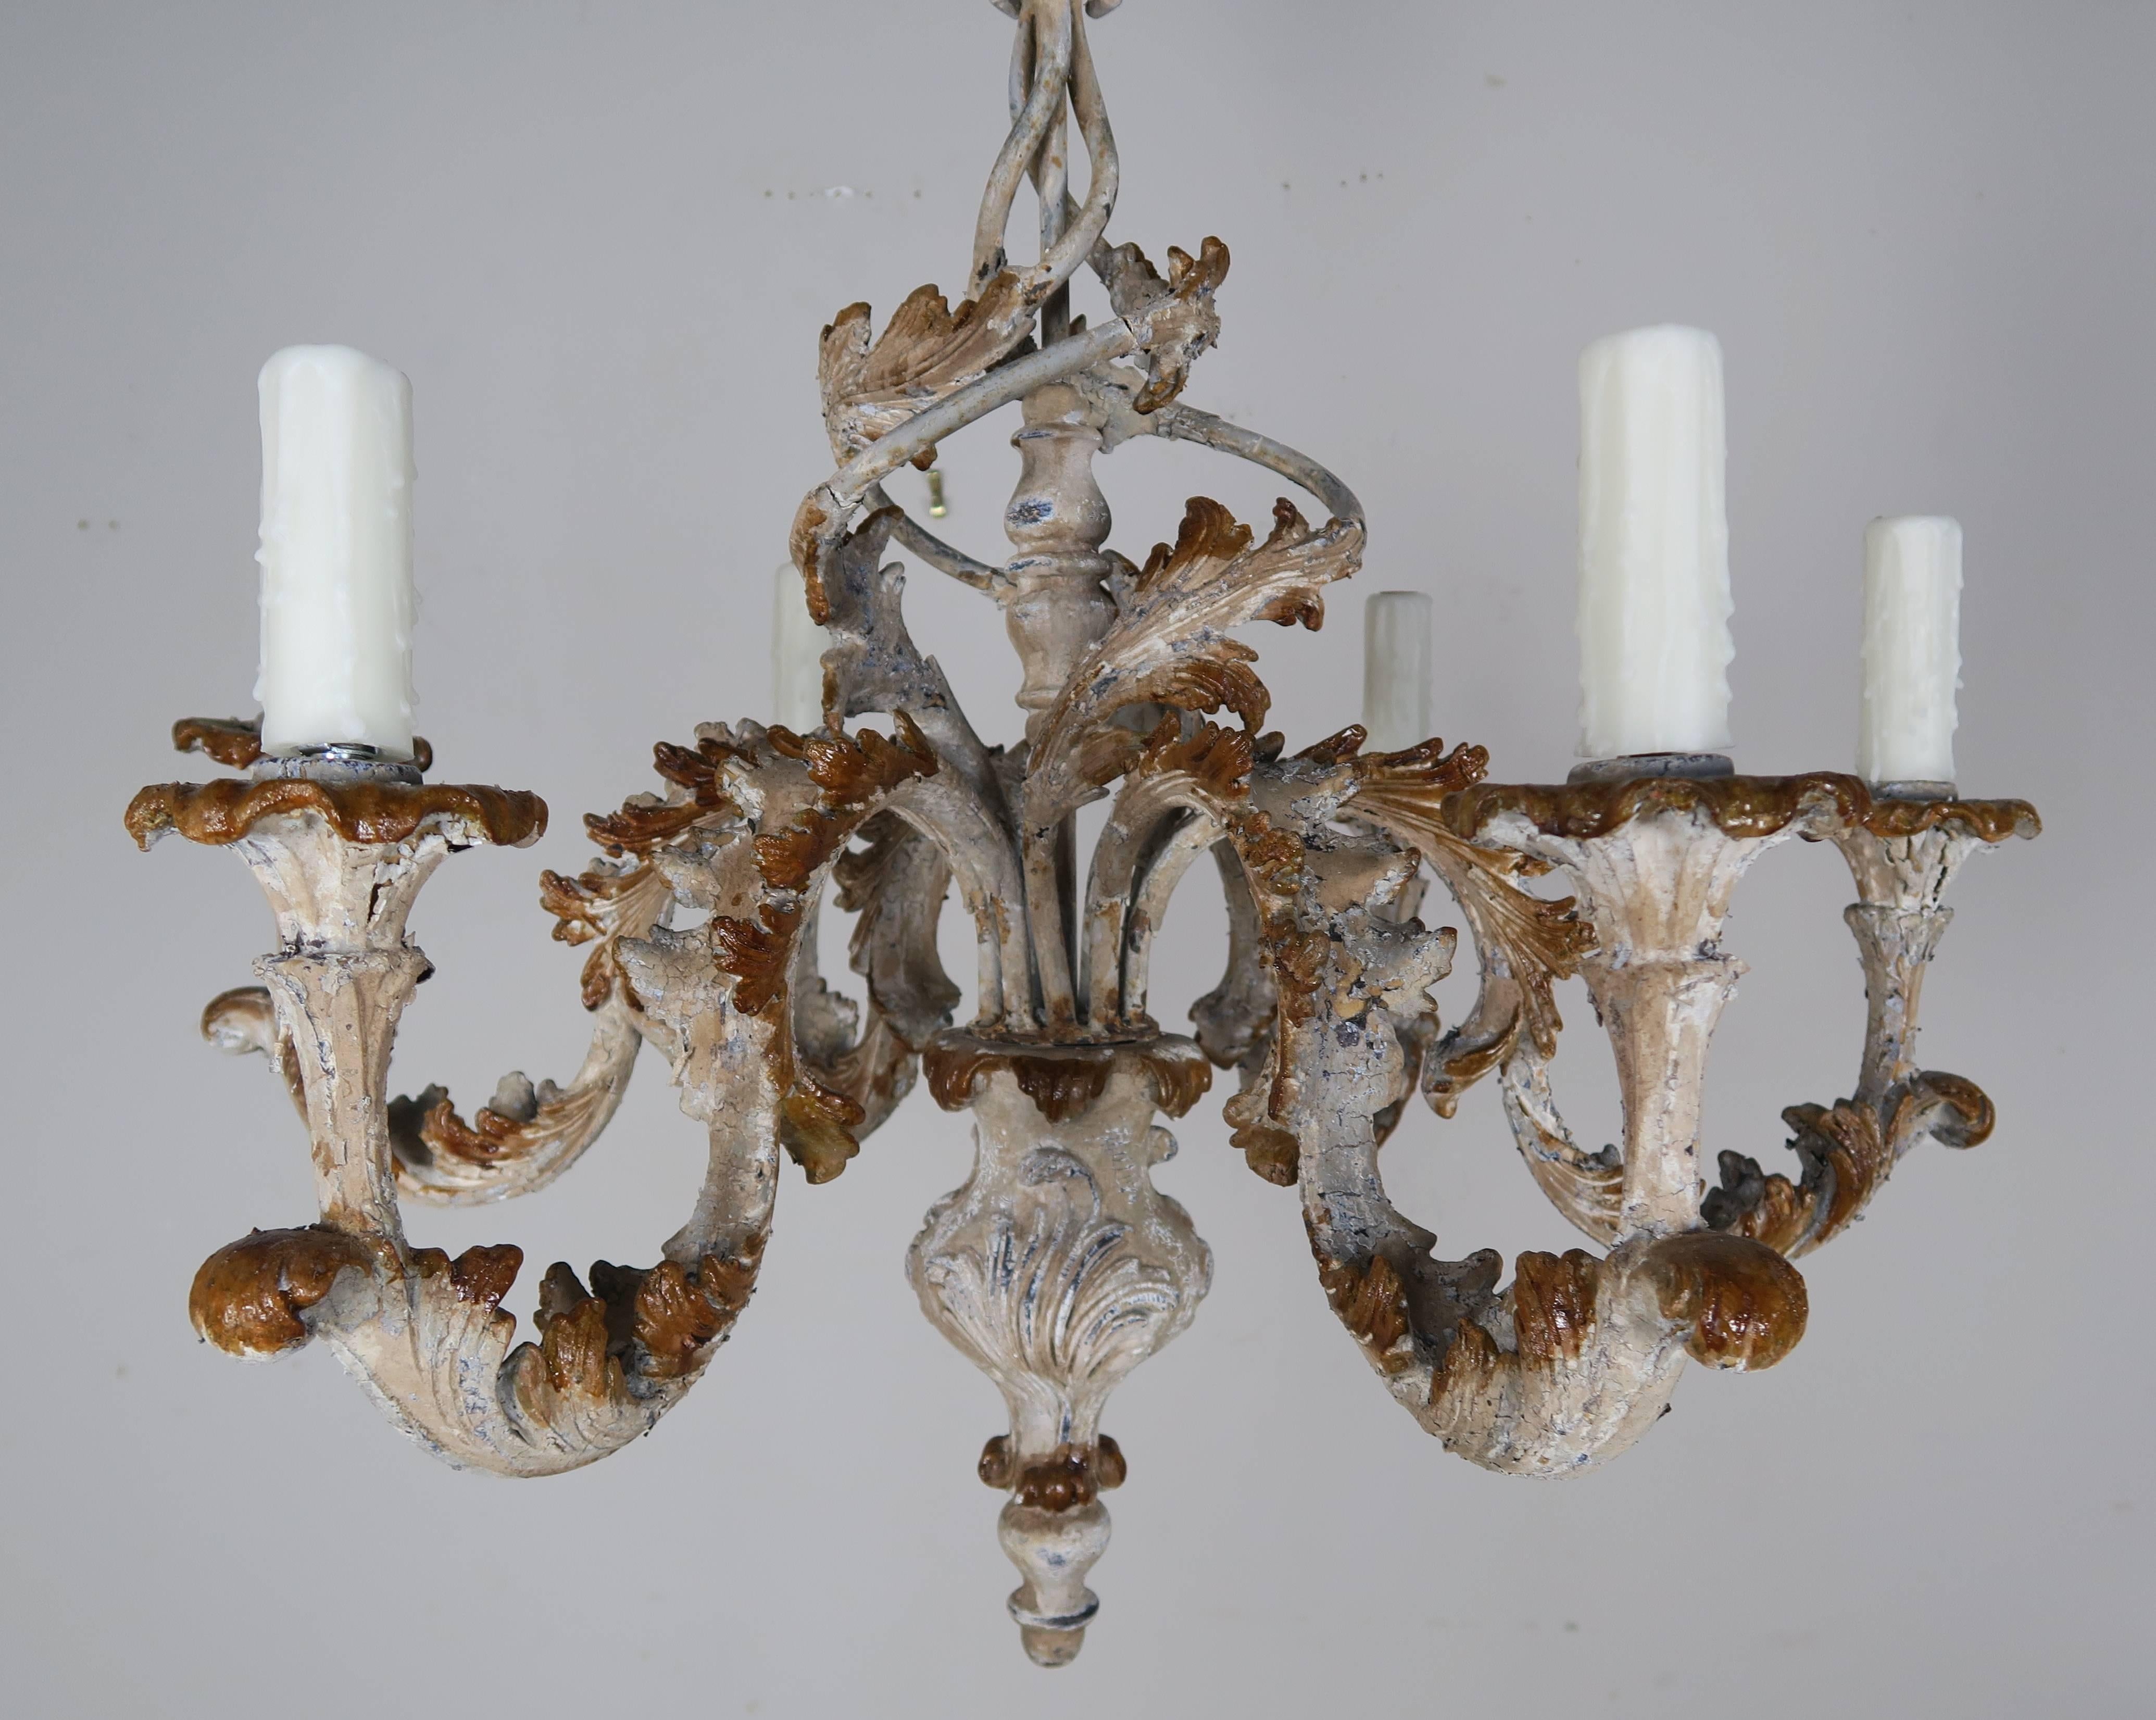 Pair of Italian carved wood painted six-light chandeliers with swirling acanthus leaves throughout. The chandeliers are newly rewired with drip wax candle covers. Chain and canopies included.